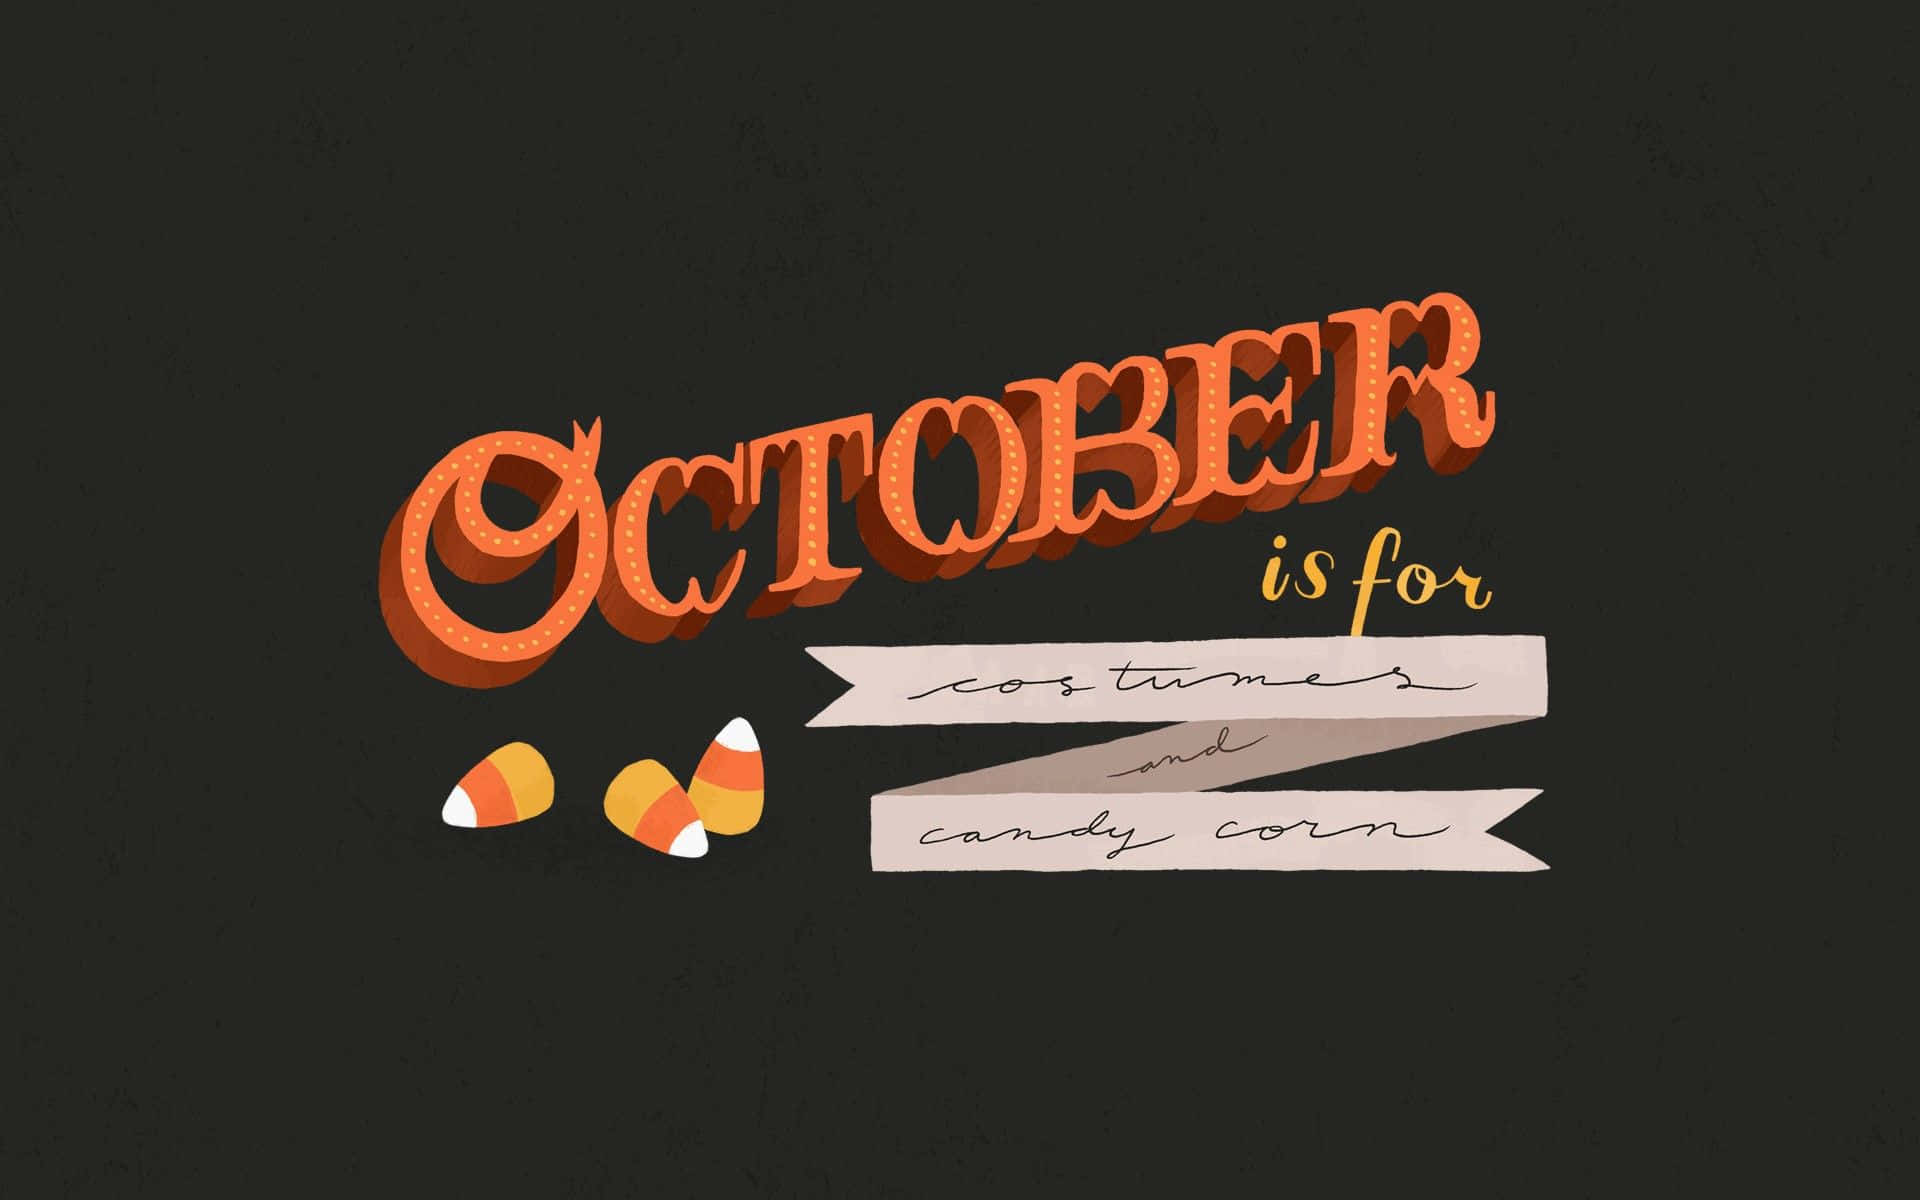 October is for candy - October